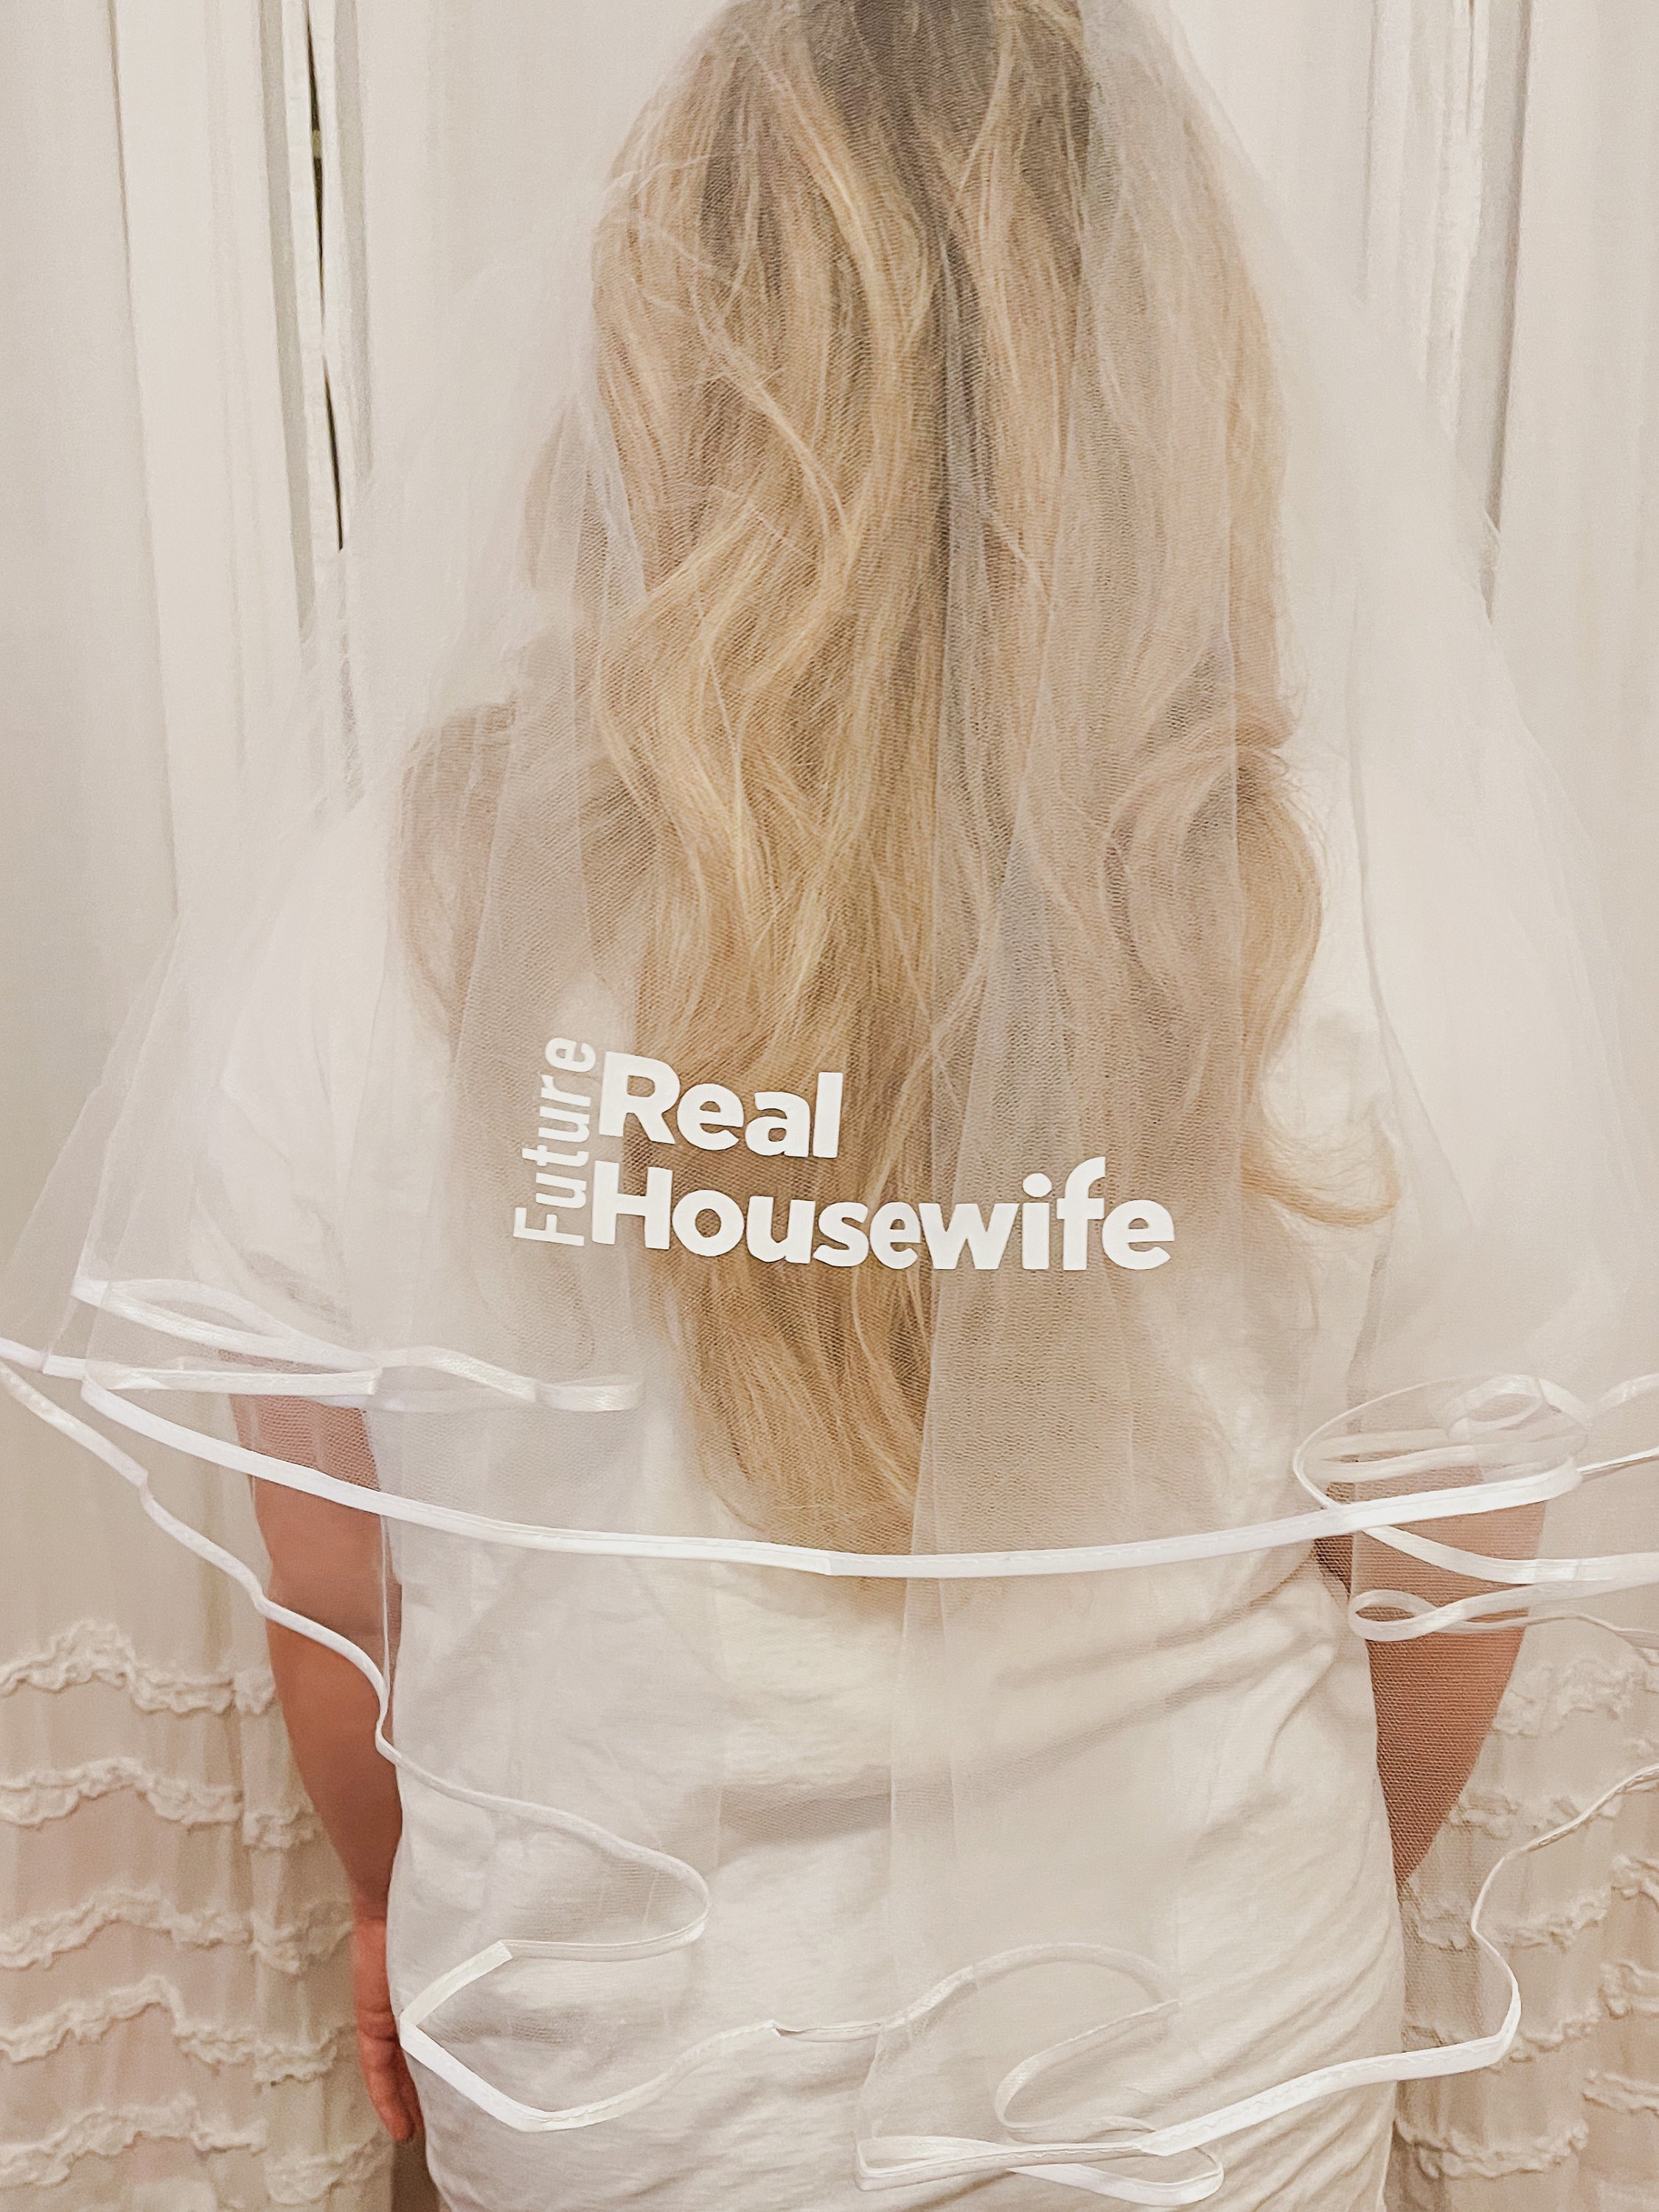 Real Housewives Inspired Bridal Veil Future Real Housewife picture image